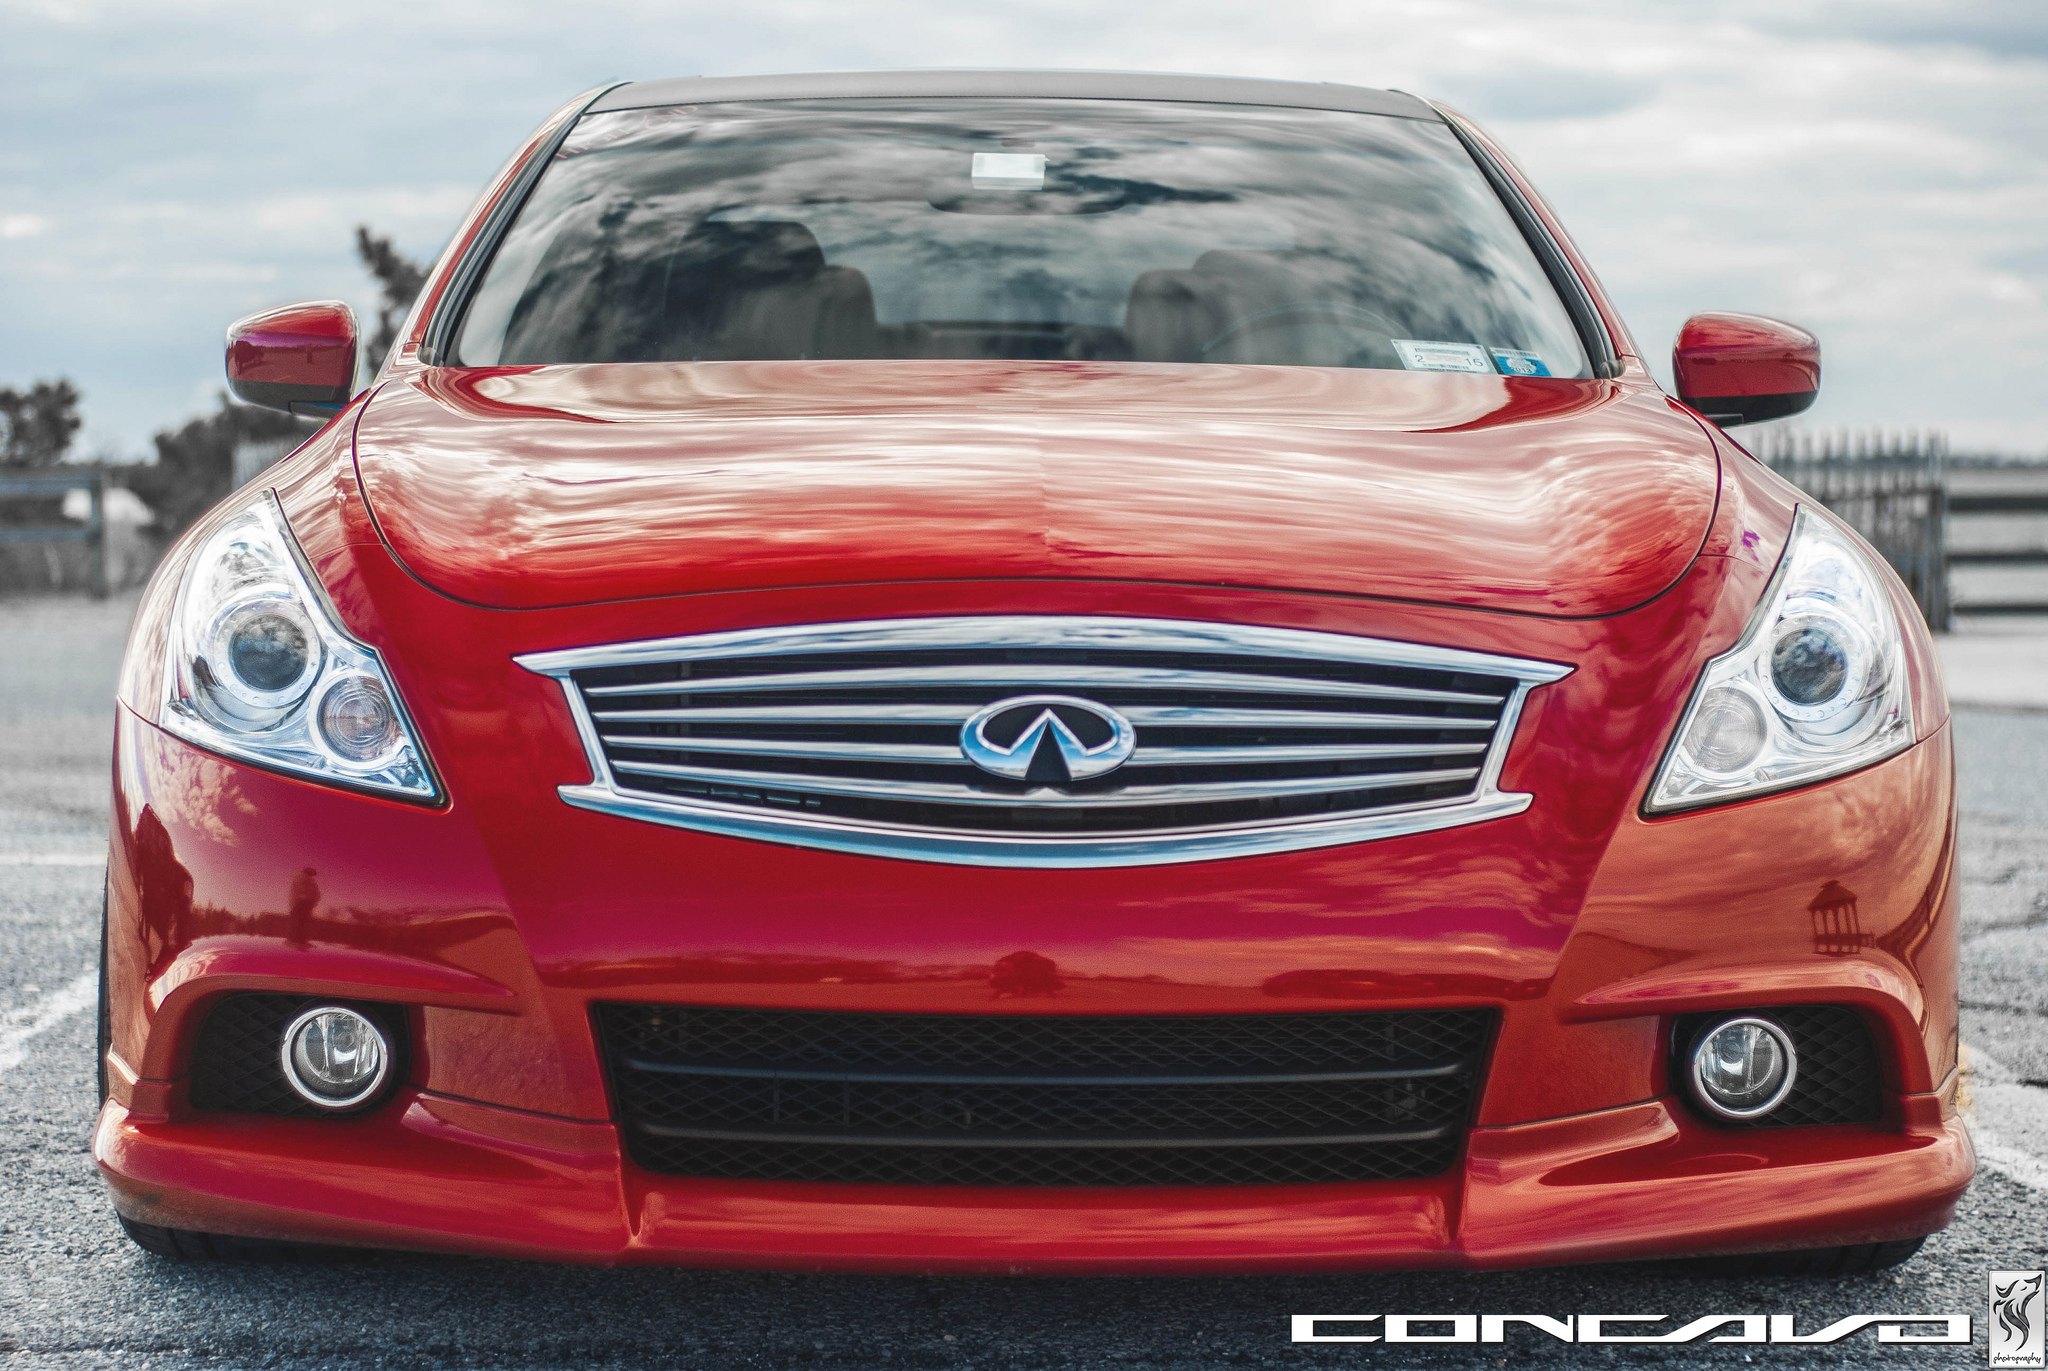 Red Infiniti G37 Aftermarket Front Bumper - Photo by Vossen